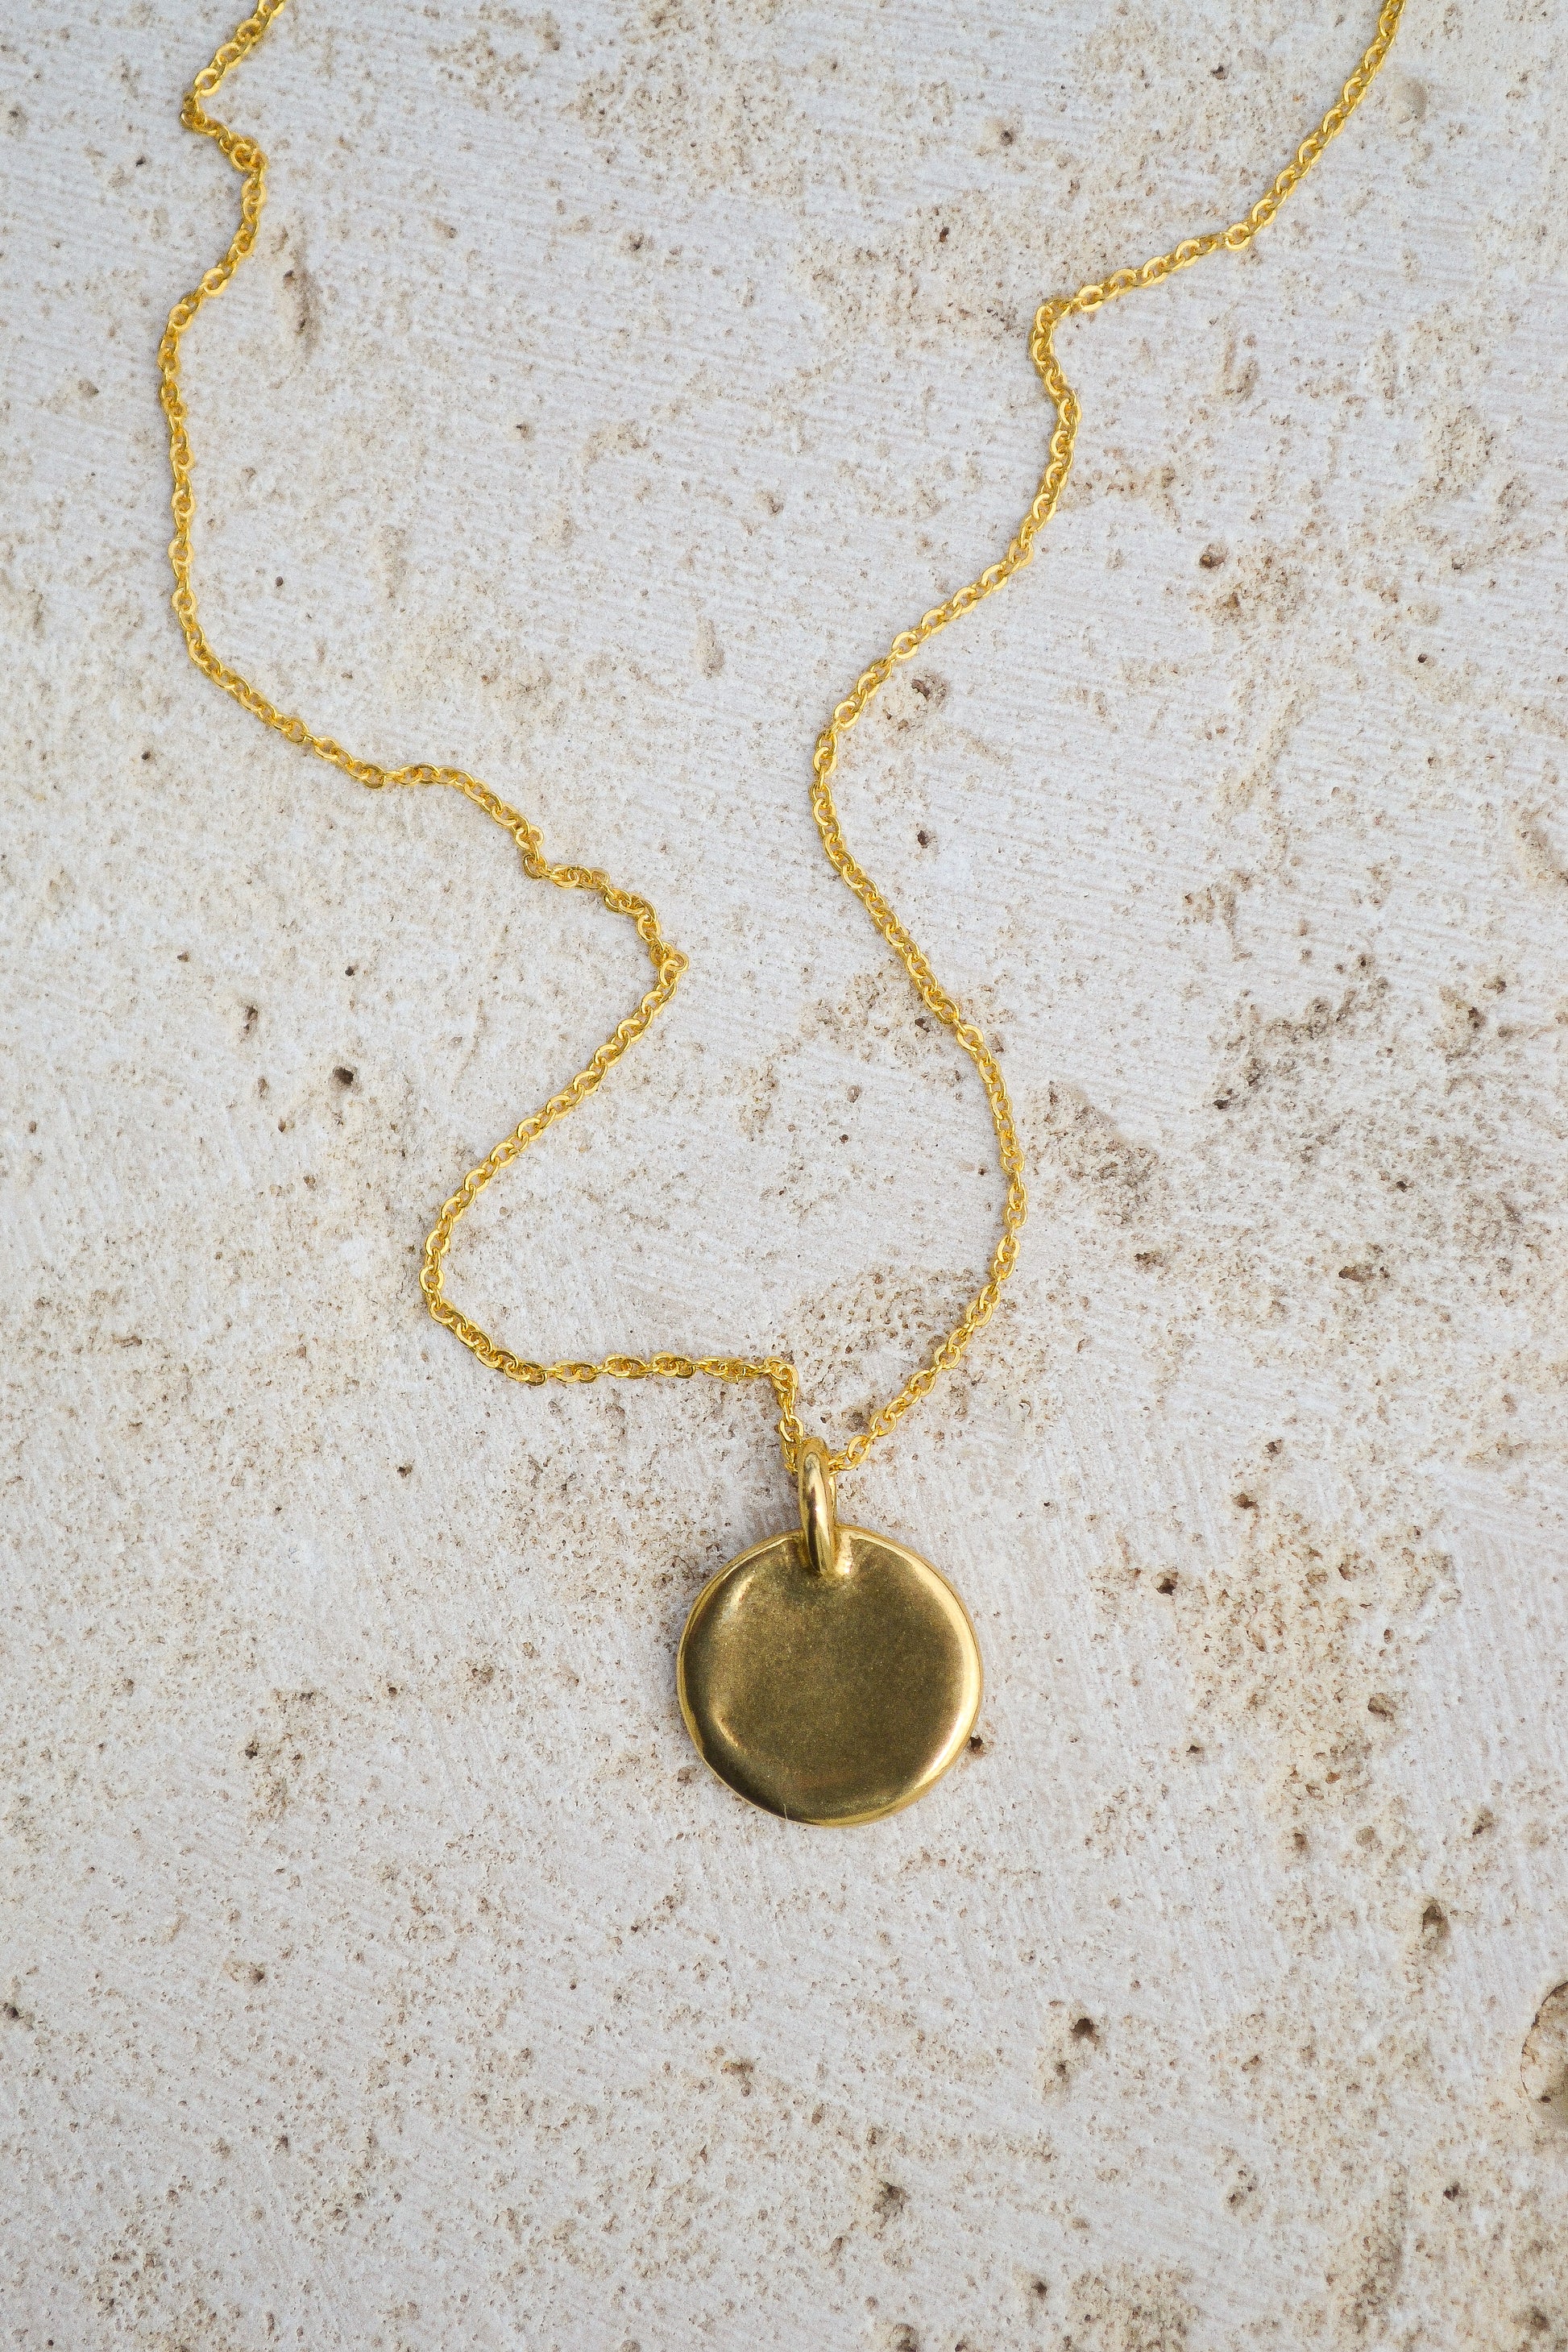 A classic everyday medallion necklace. Simple and feminine with a fluid feel. Inspired by the artist Georgia O'Keeffe. Georgia Necklace by Amanda Hunt